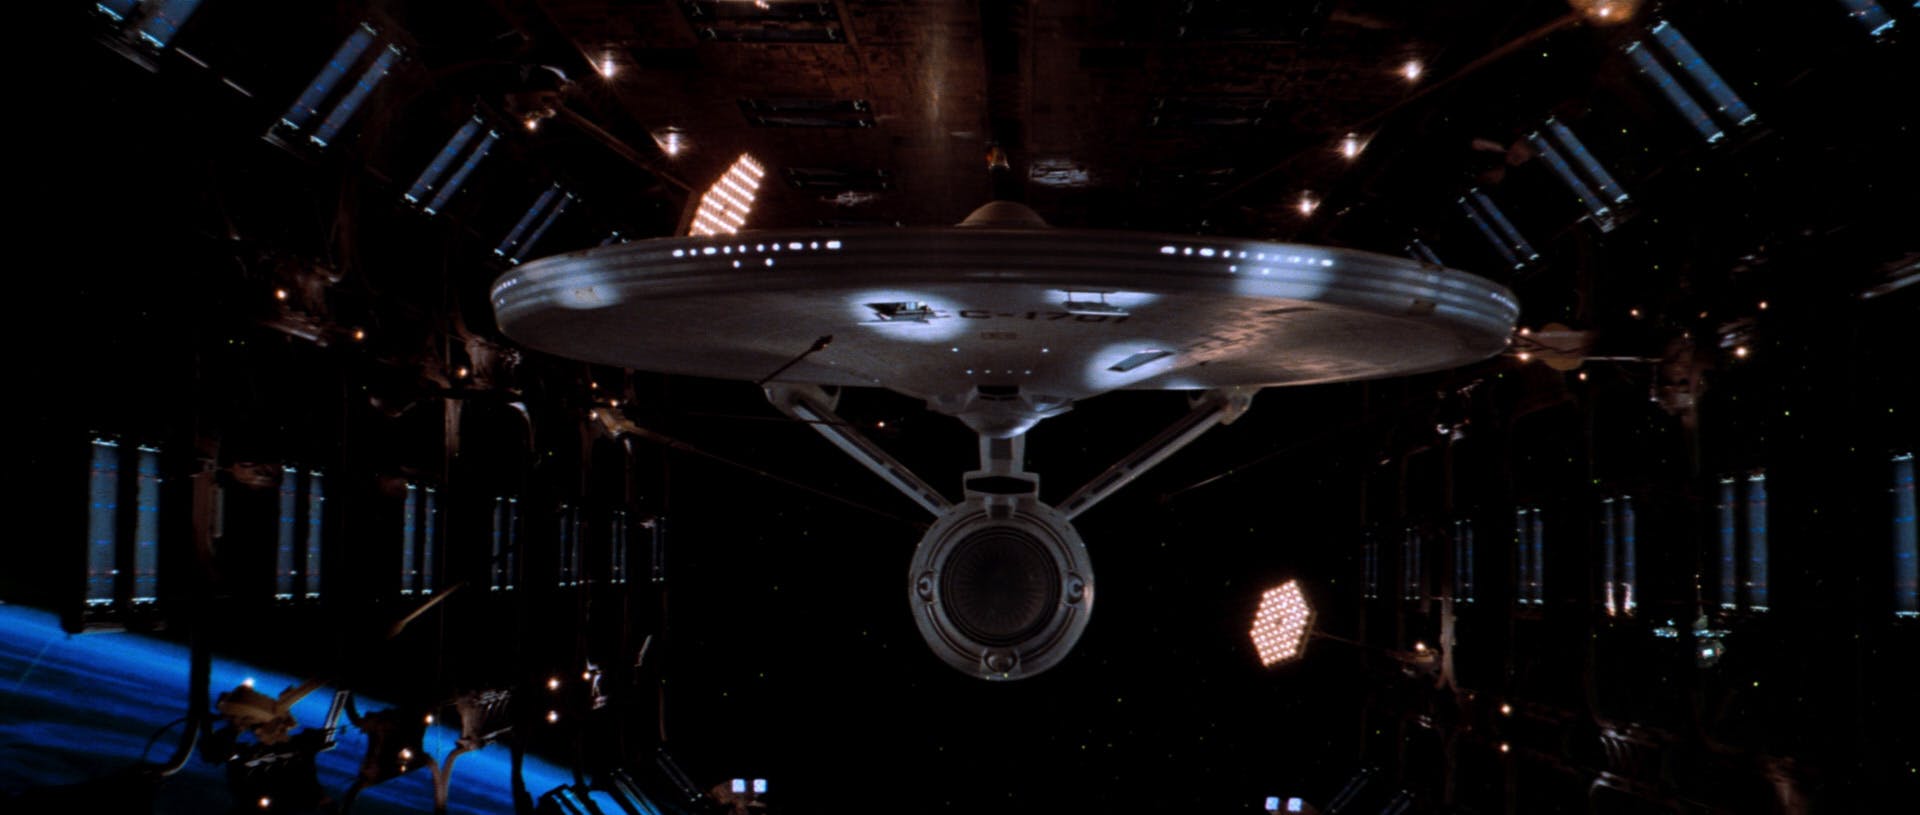 The first shot of the newly retrofitted U.S.S Enterprise stationed in dry dock in Star Trek: The Motion Picture